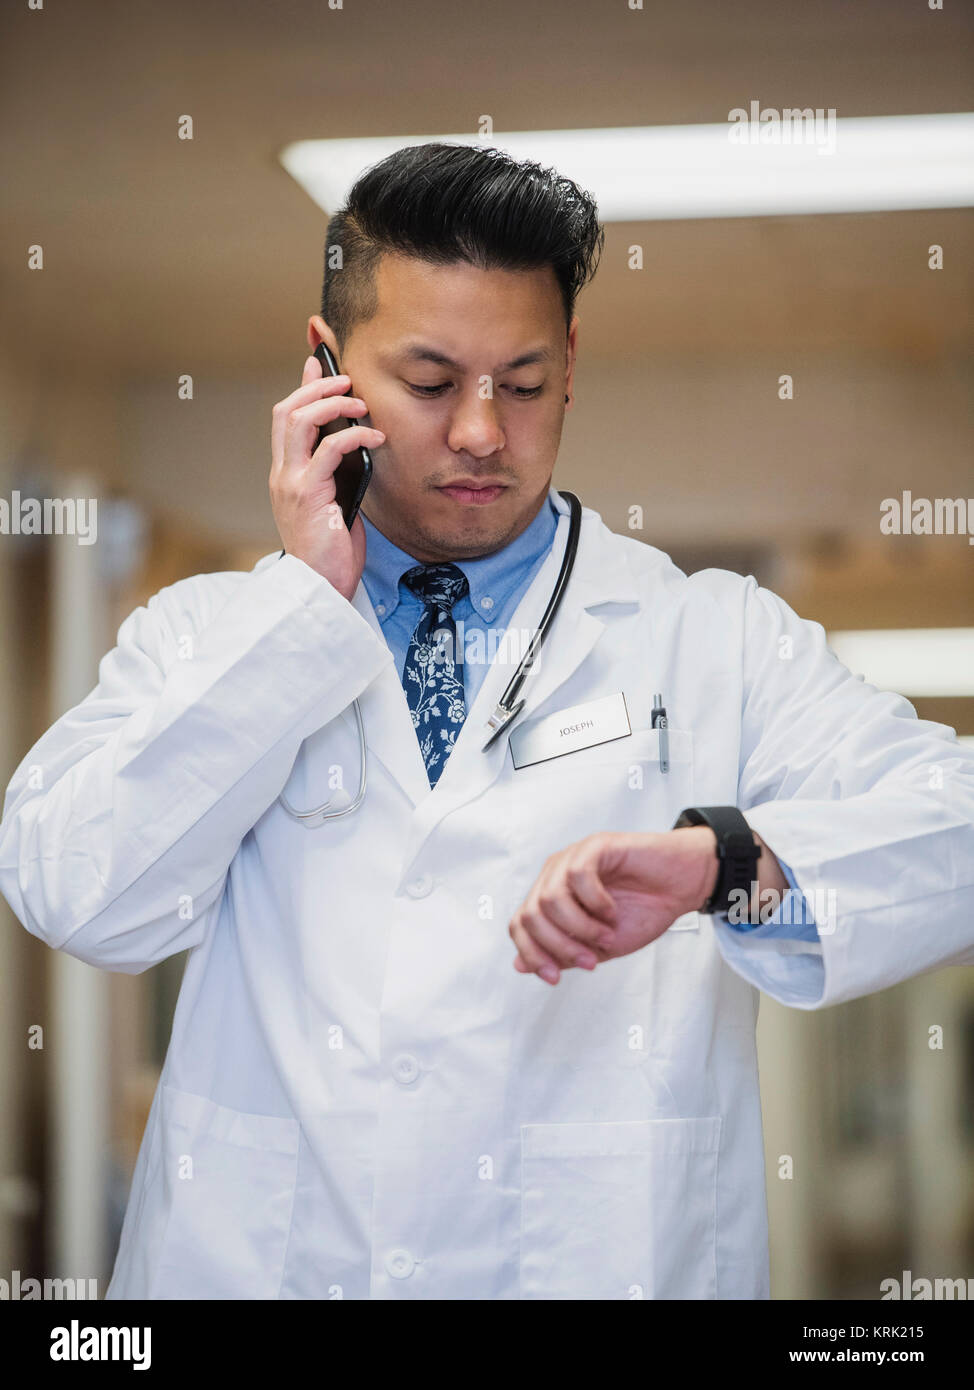 Filipino doctor talking on cell phone and checking the time Stock Photo